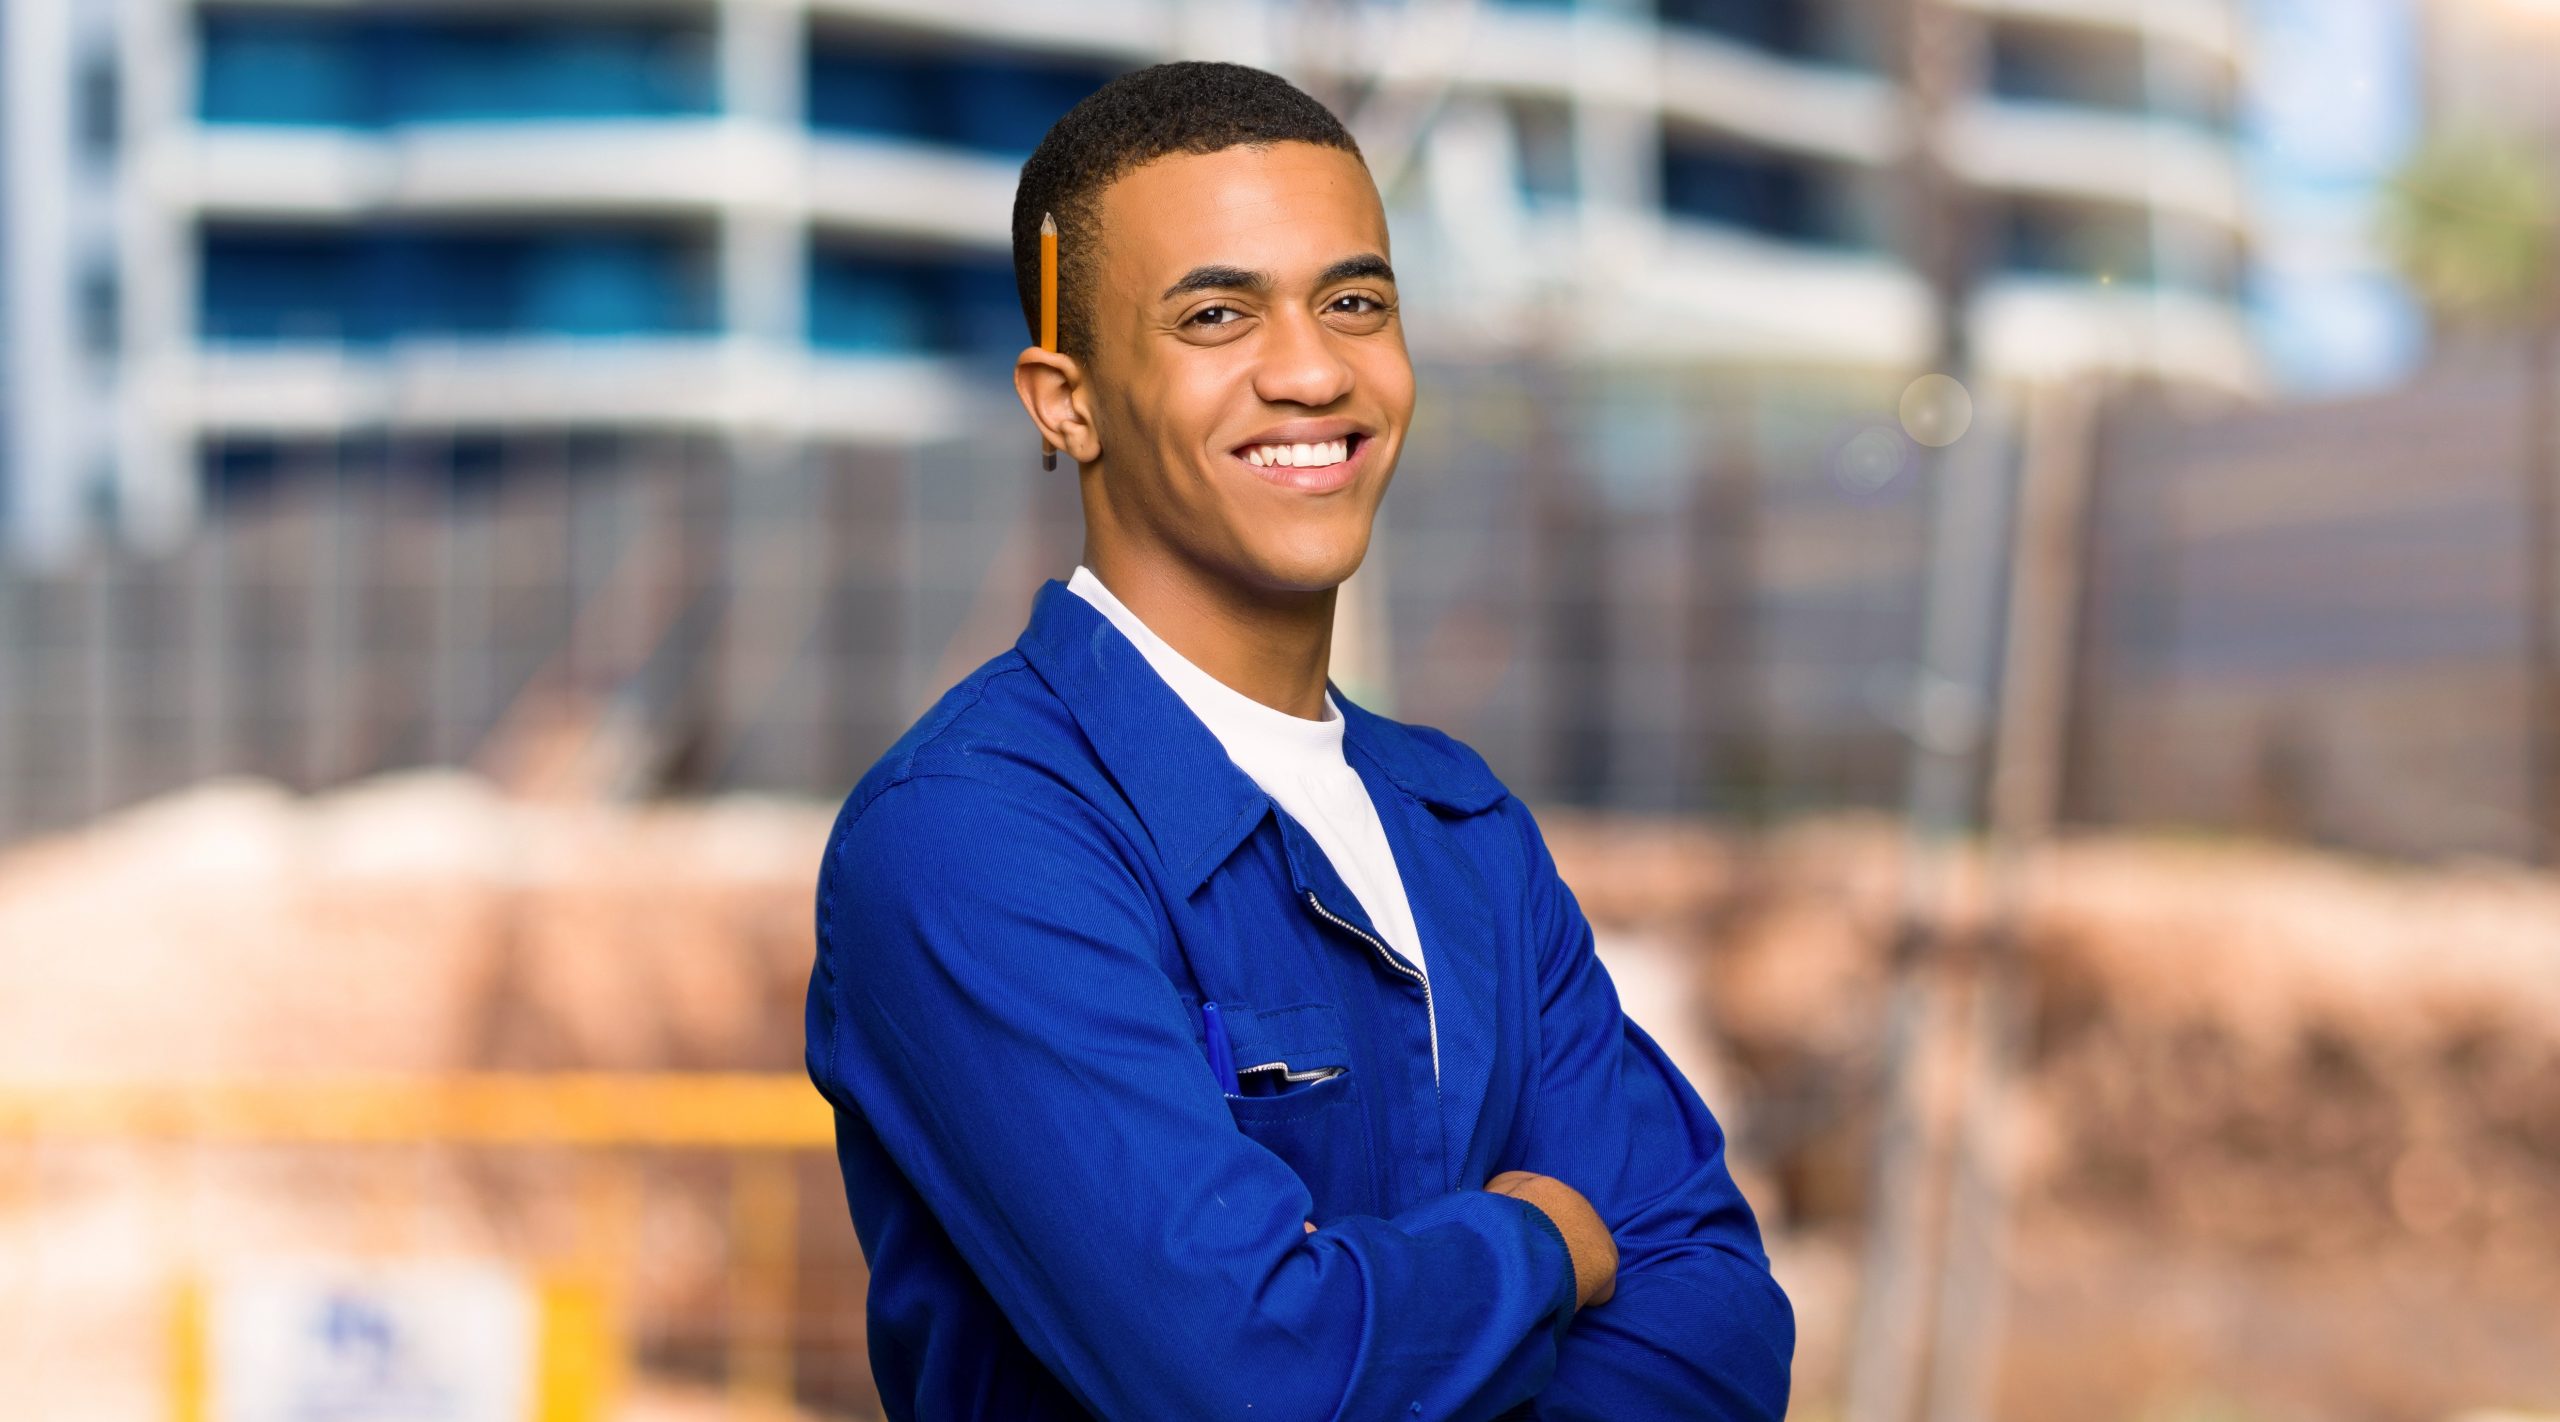 The young man stands smiling with his arms crossed wearing a smart blue work shirt.